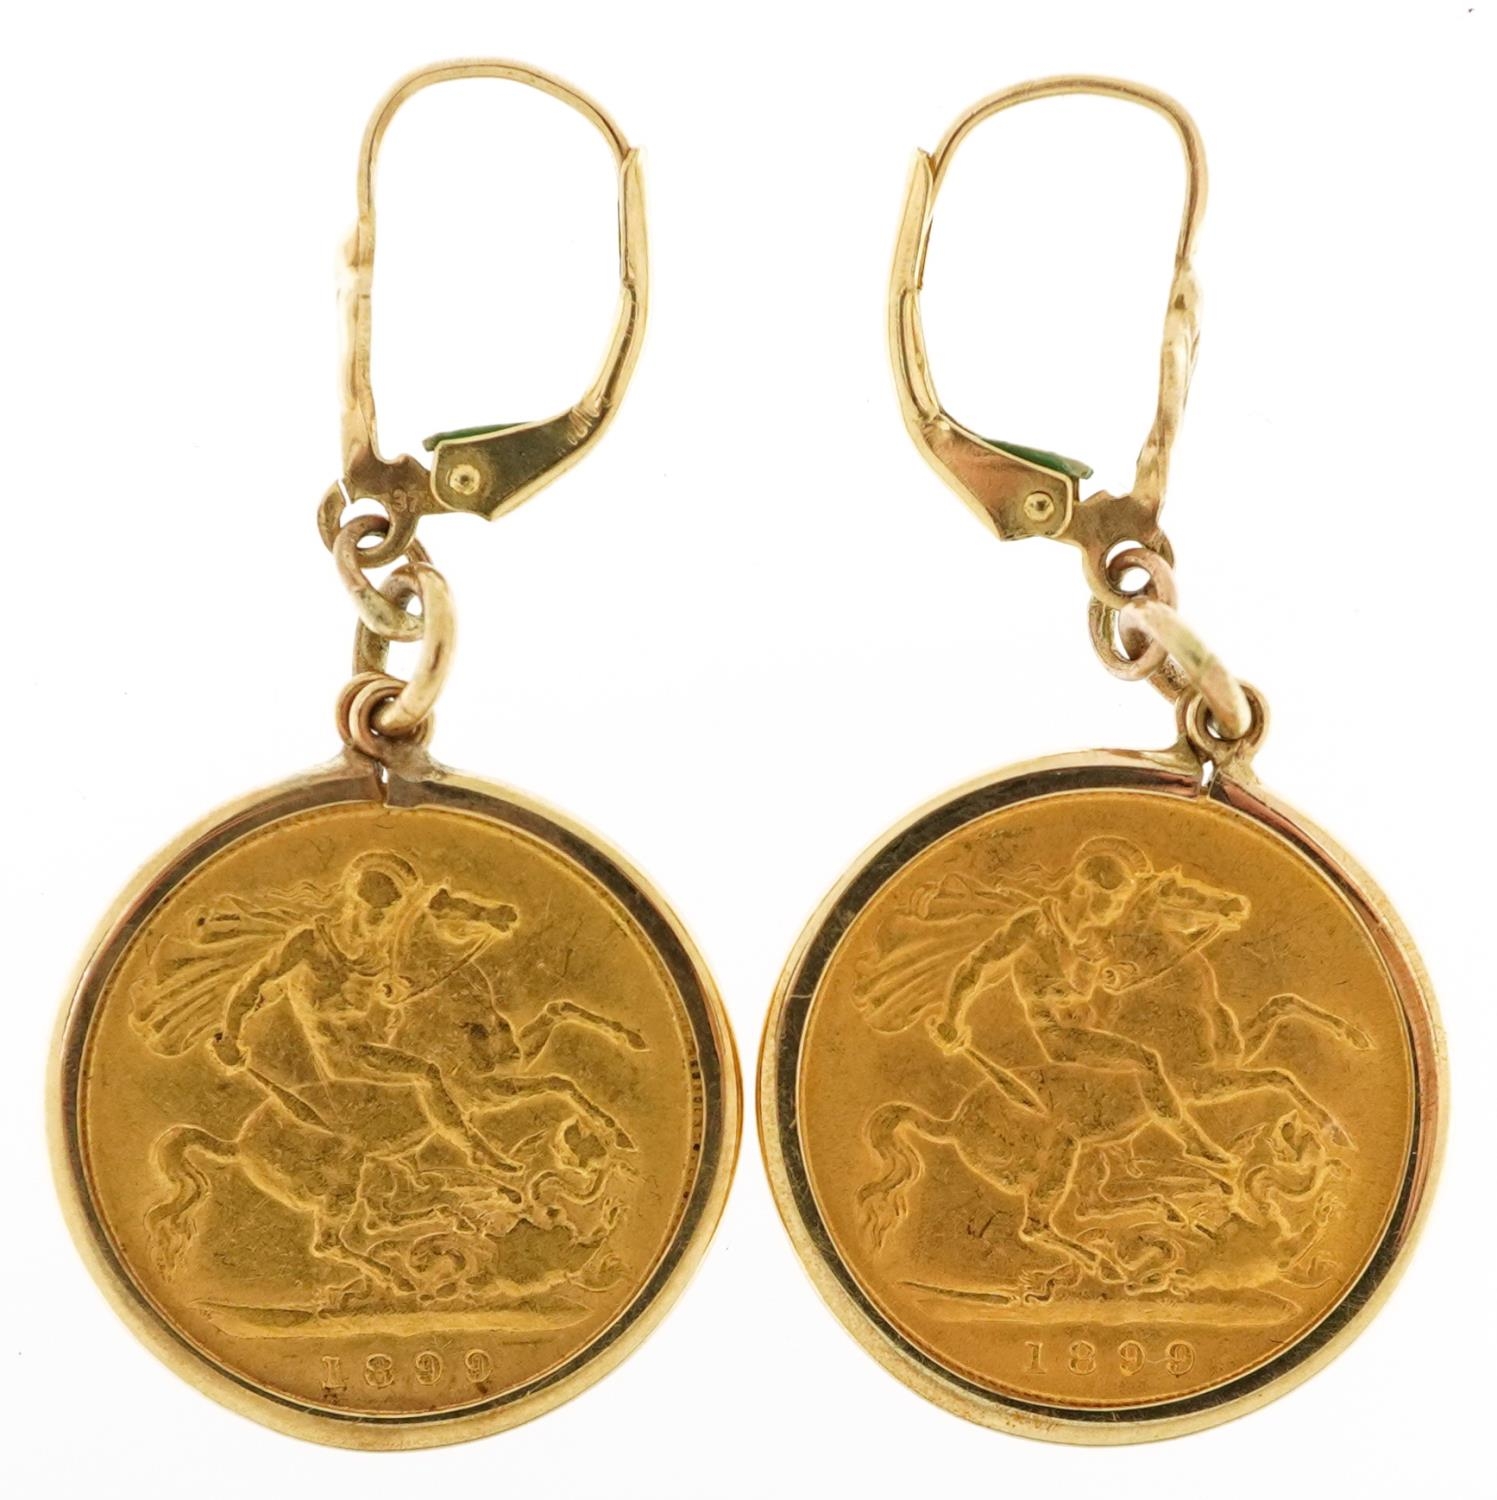 Pair of Queen Victoria 1899 gold half sovereigns housed in 9ct gold earring mounts, total 10.2g